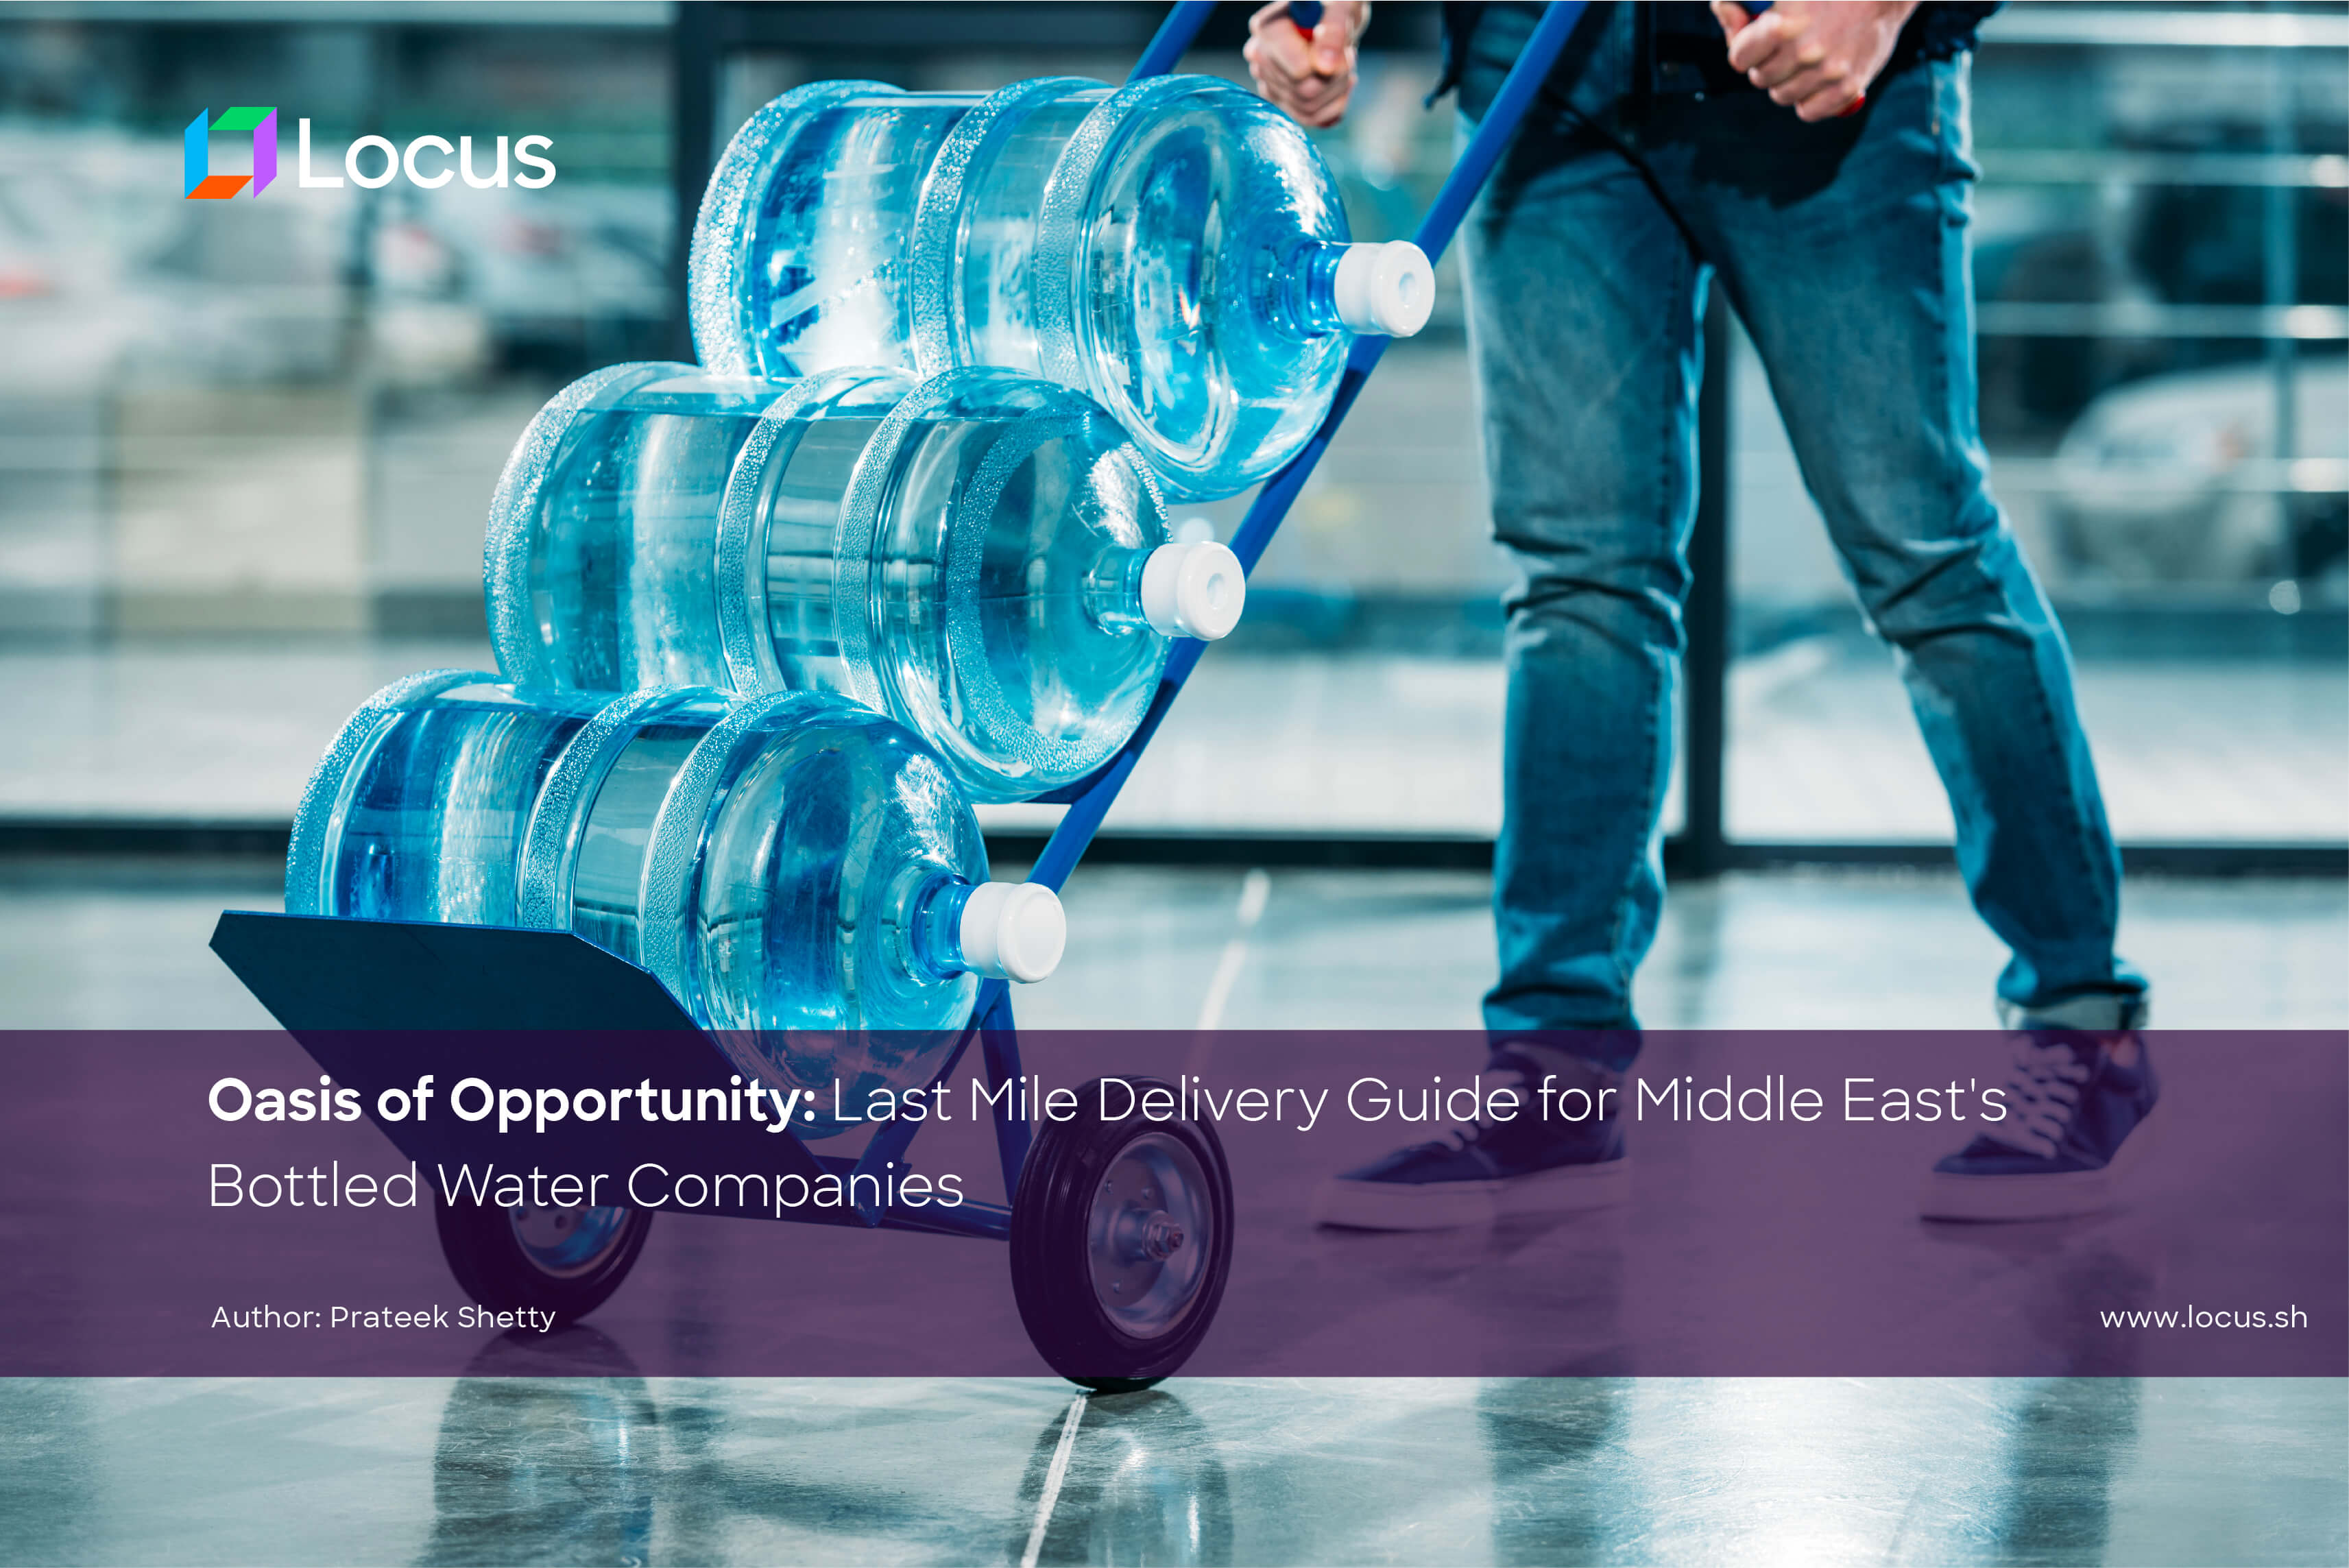 Middle East Bottled Water Manufacturers: Last Mile Delivery Strategies